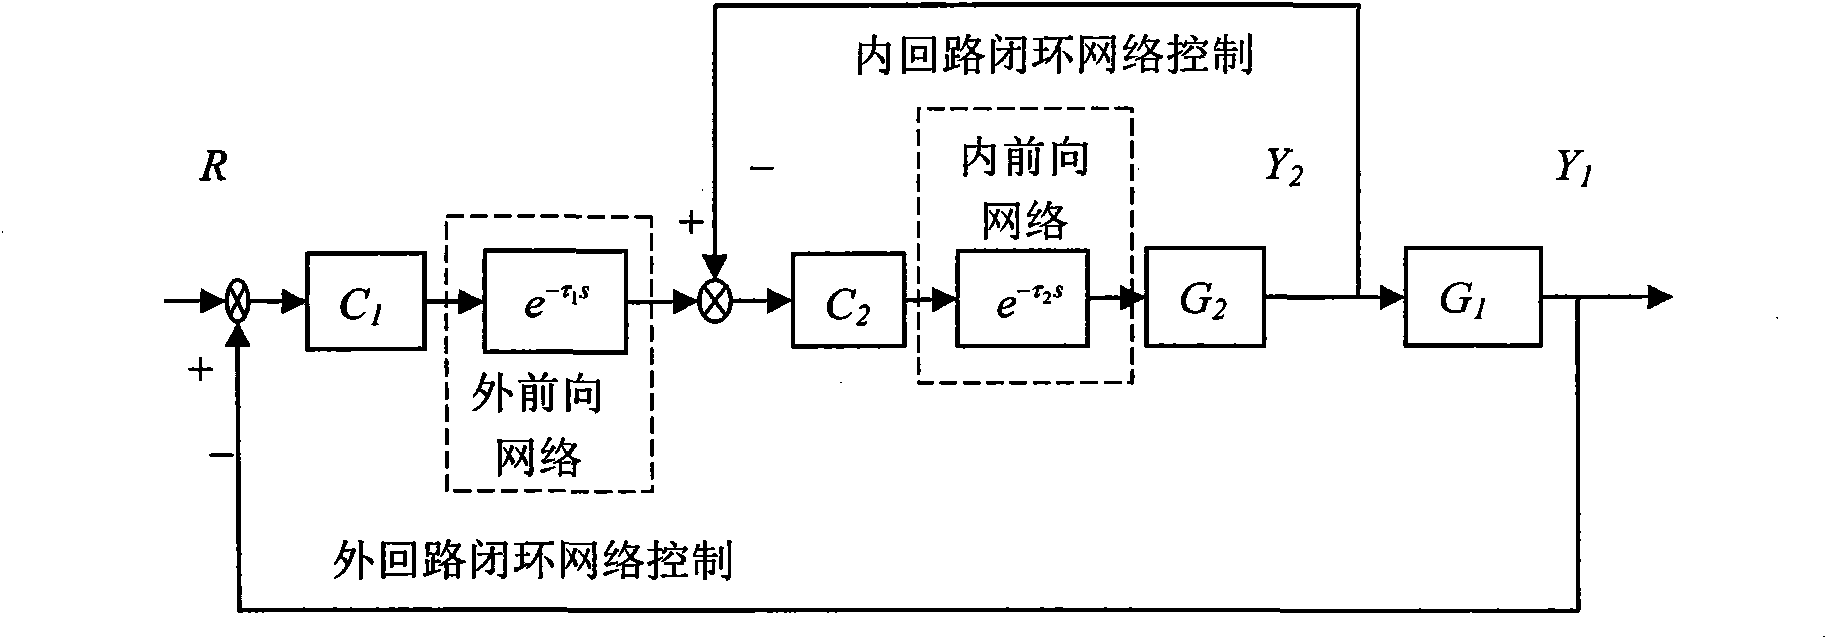 Forward channel random network time-delay compensation method for network cascade control system